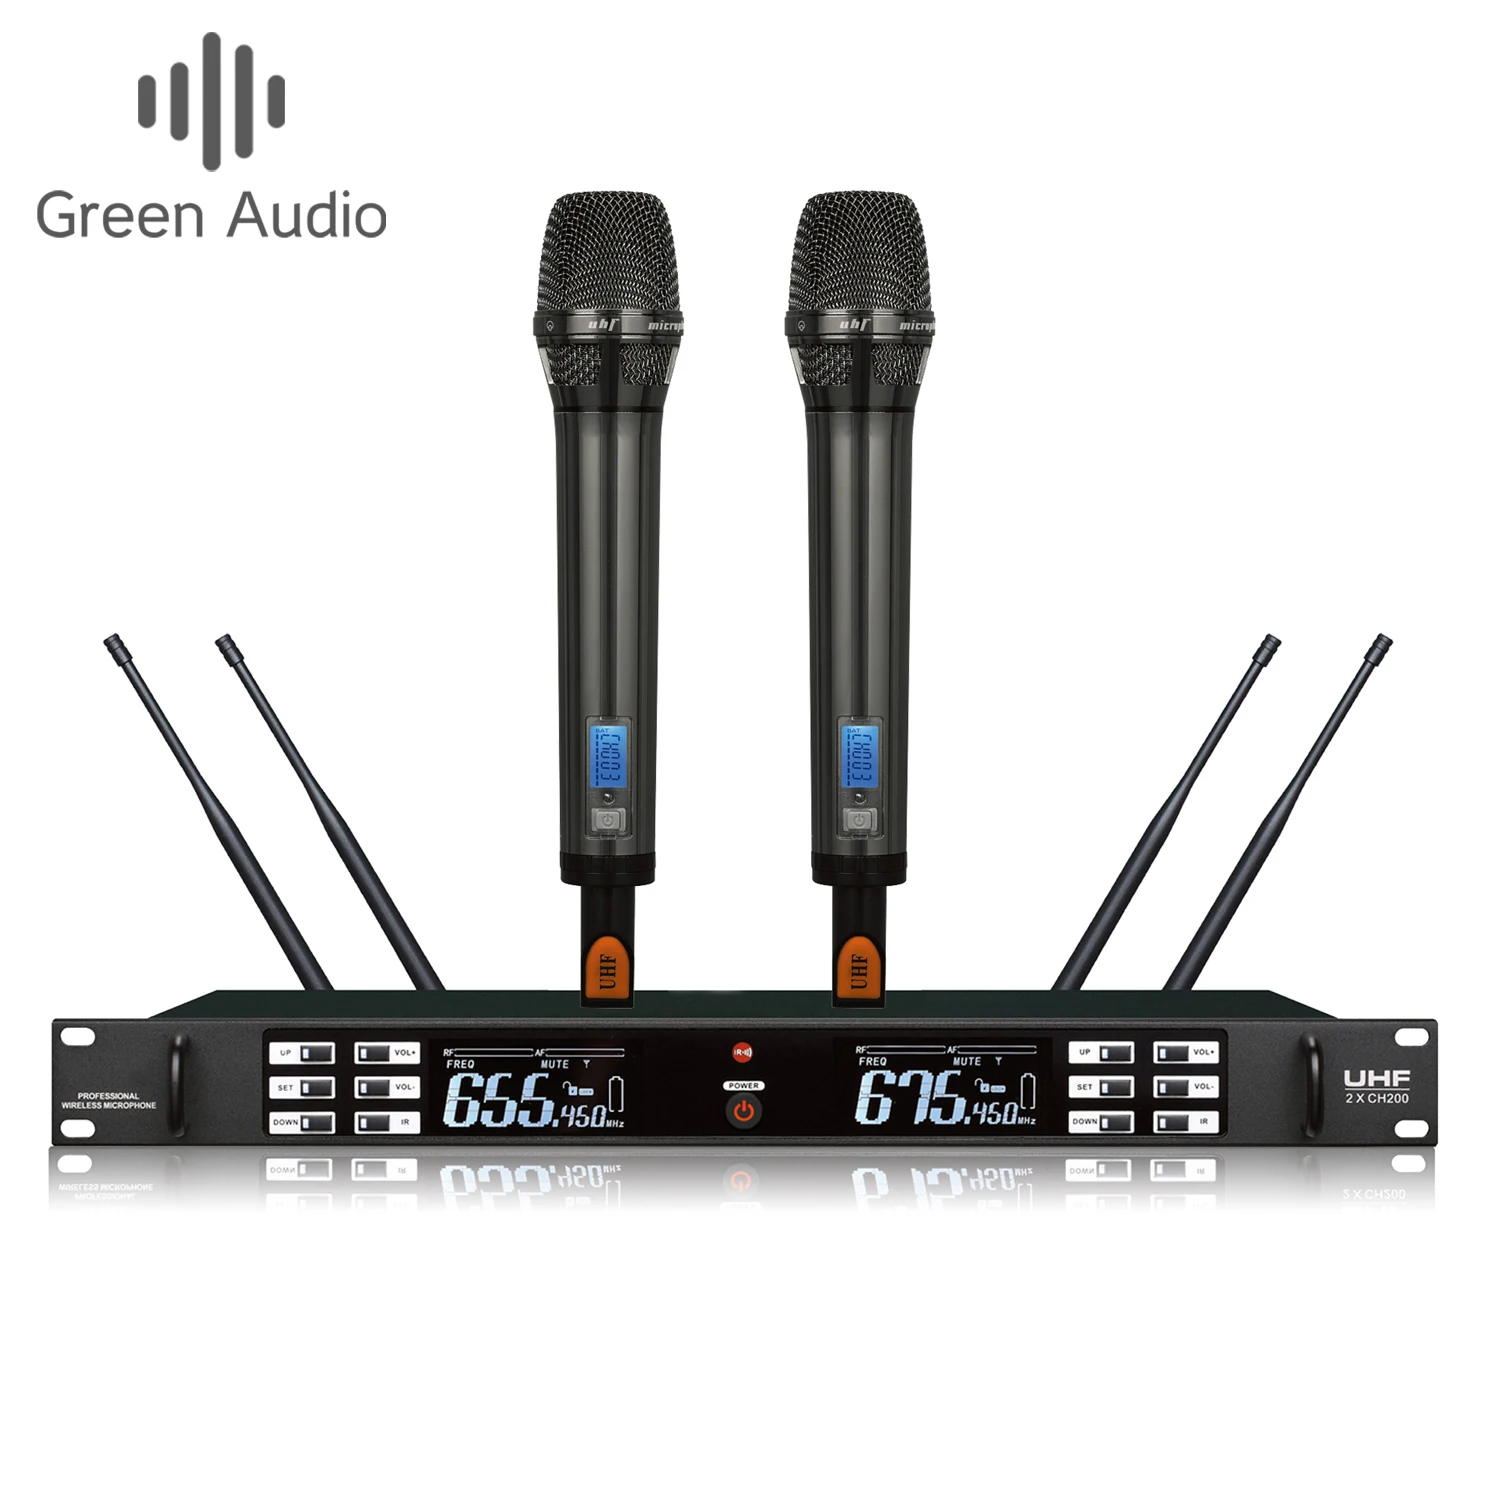 

GAW-BR609D True Diversity KTV Home Entertainment Stage Performance Conference Room Speech One Drag Two Wireless Microphone